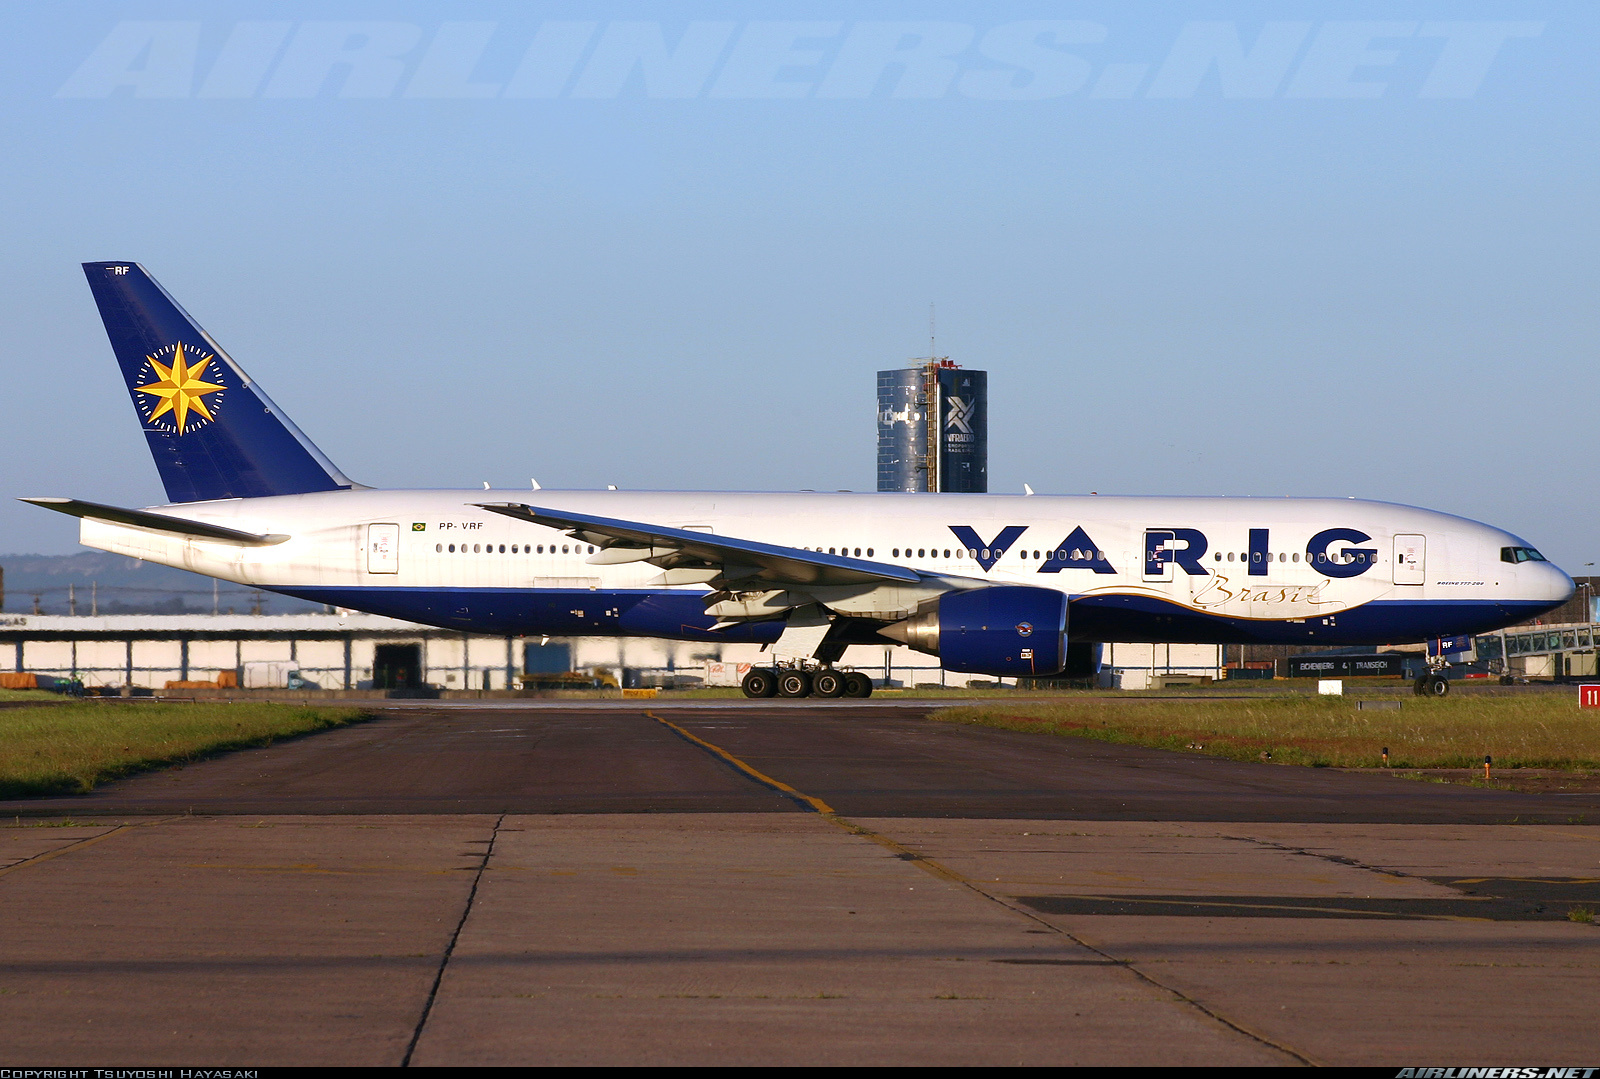 Vehicles Boeing 777 HD Wallpaper | Background Image